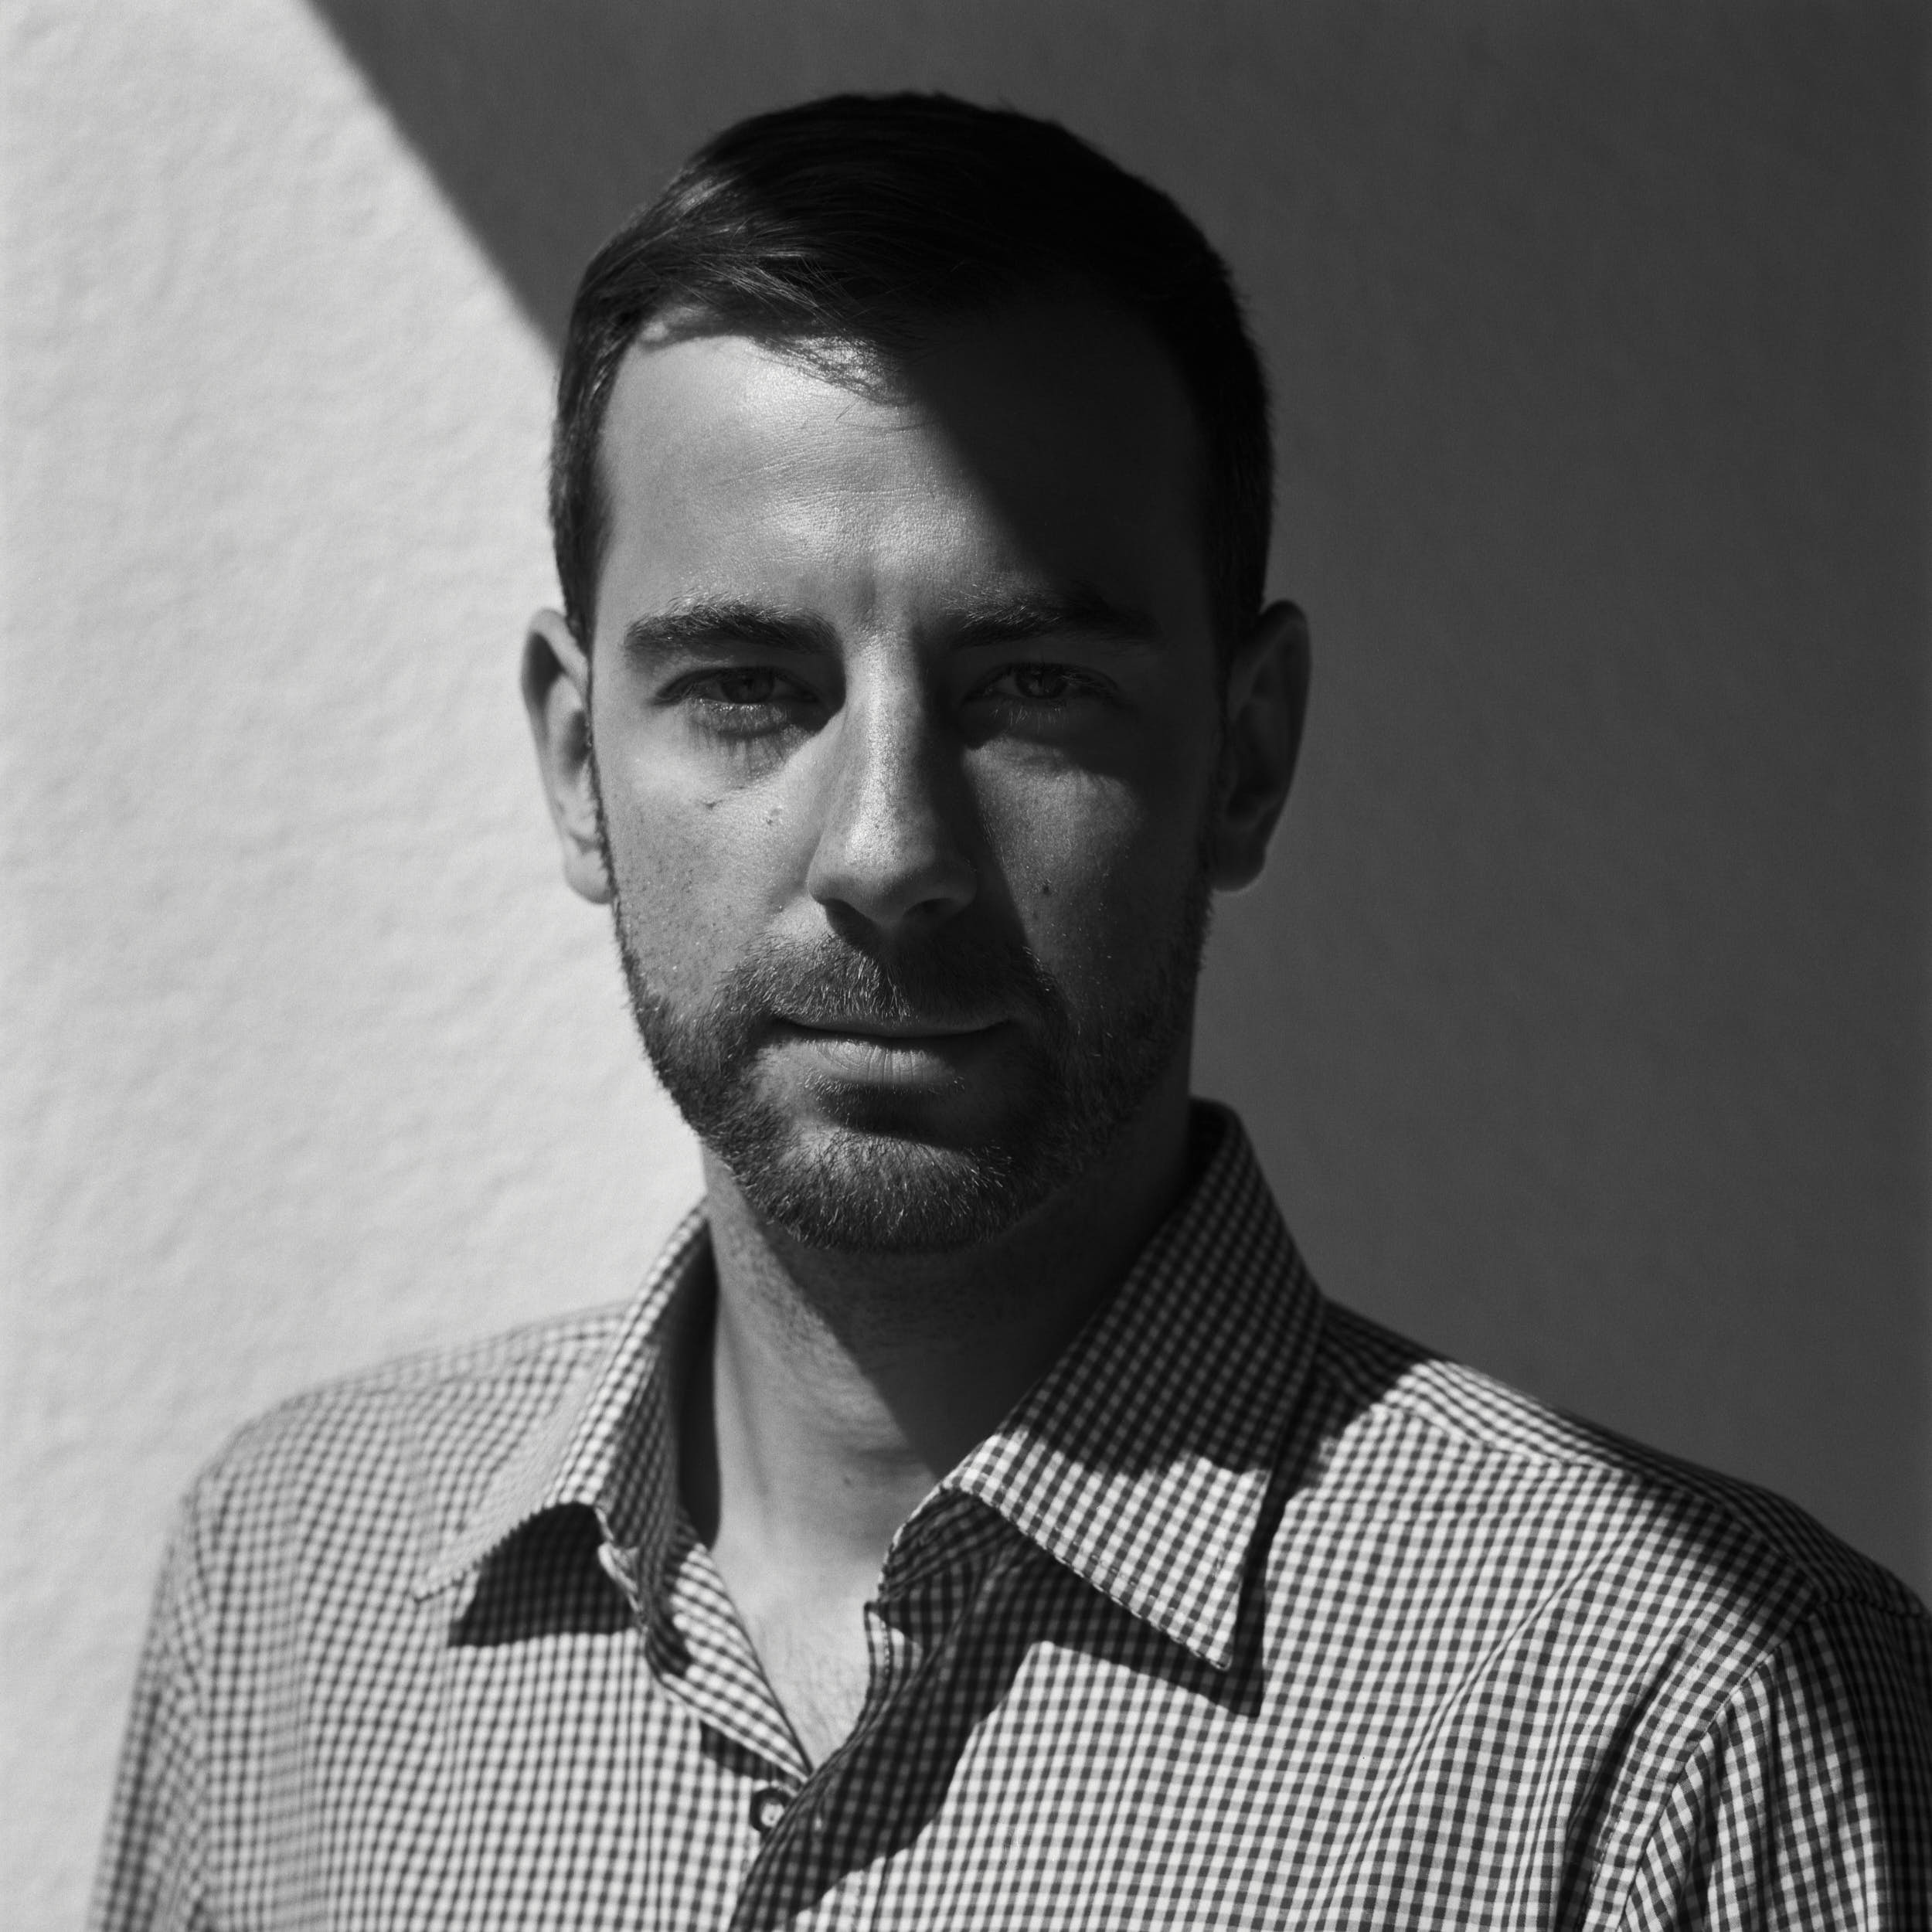 Contrasty portrait of a man with deep shadows wearing checkered shirt. Medium format film photography.